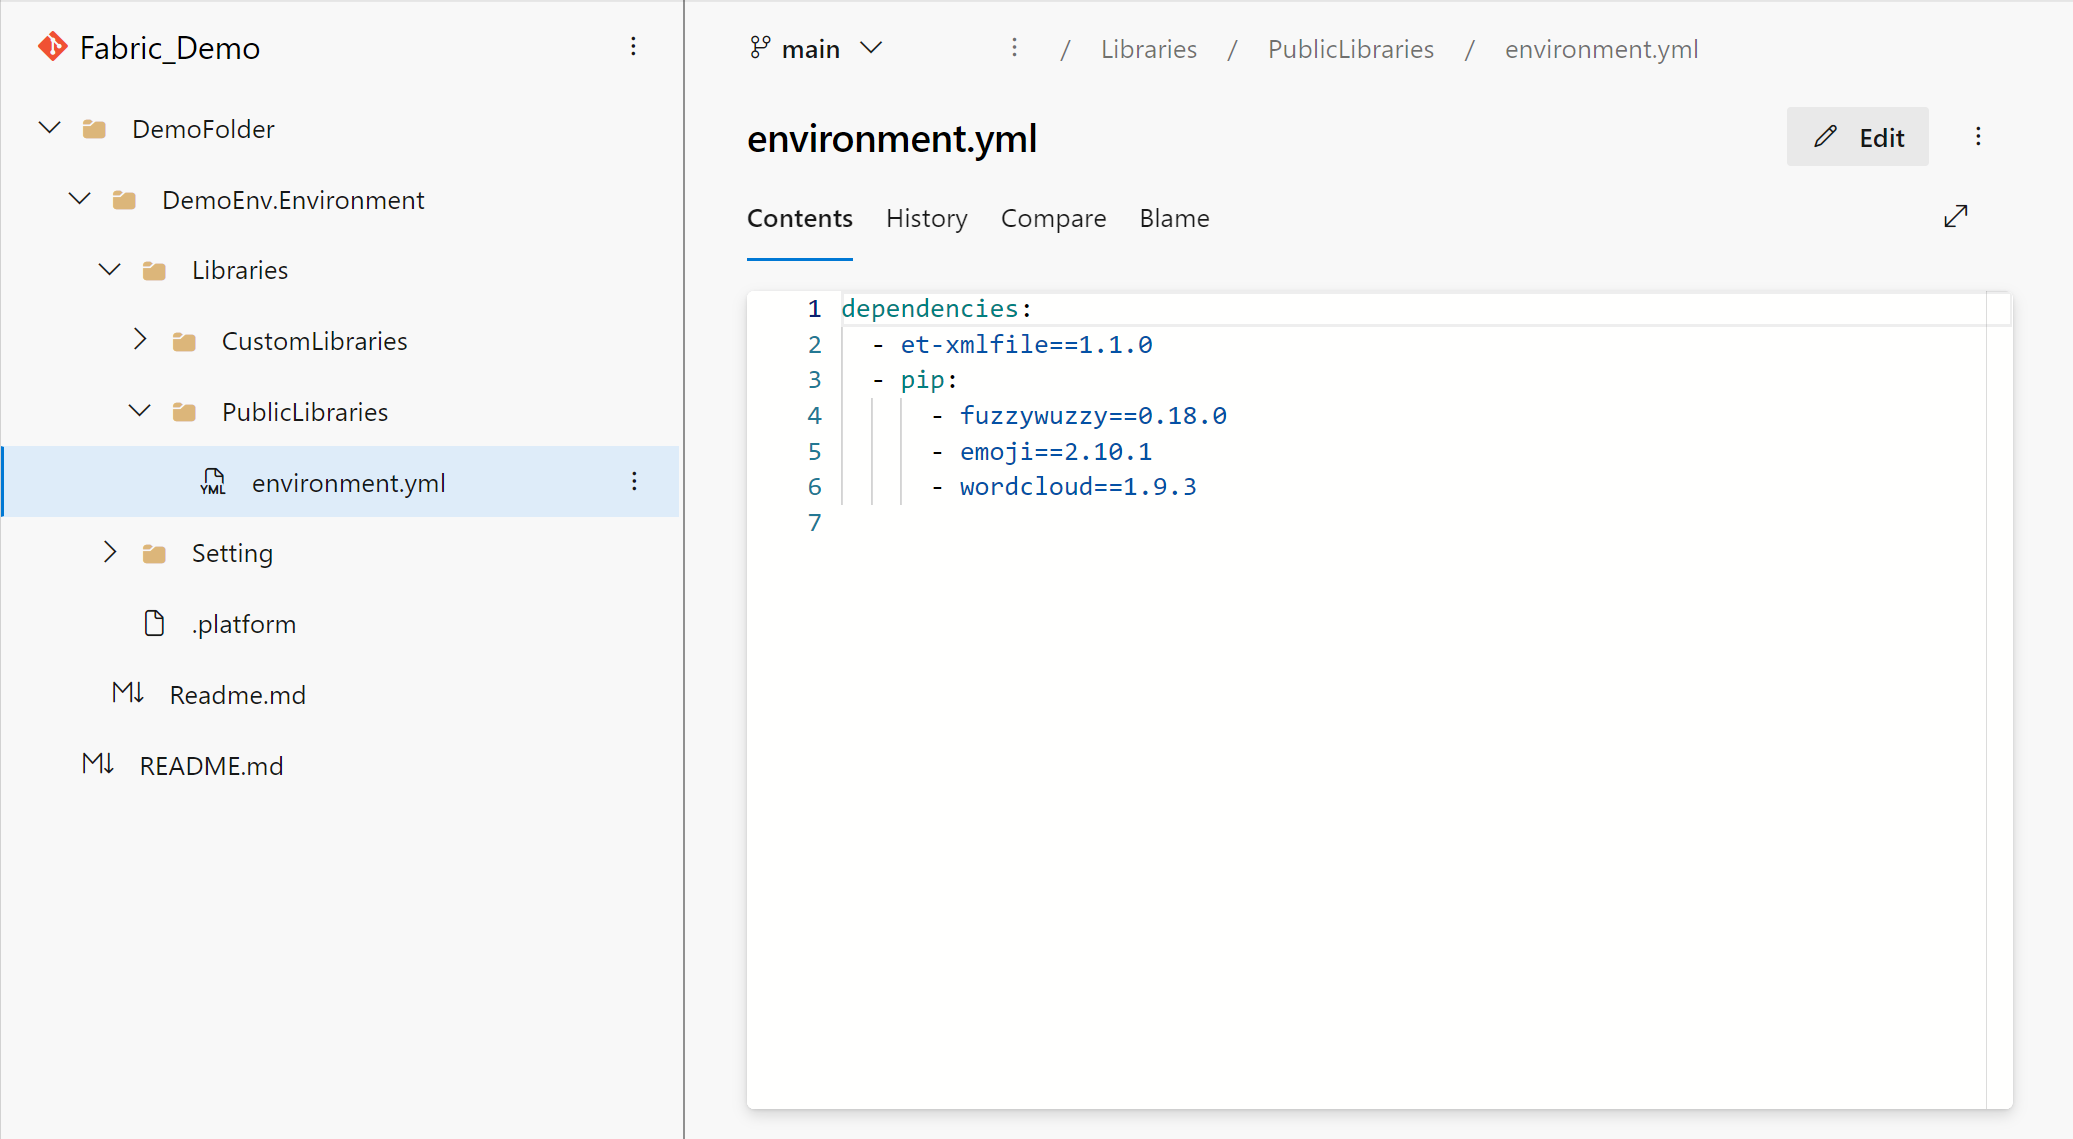 Screenshot of the public library local representation of the environment in Git.